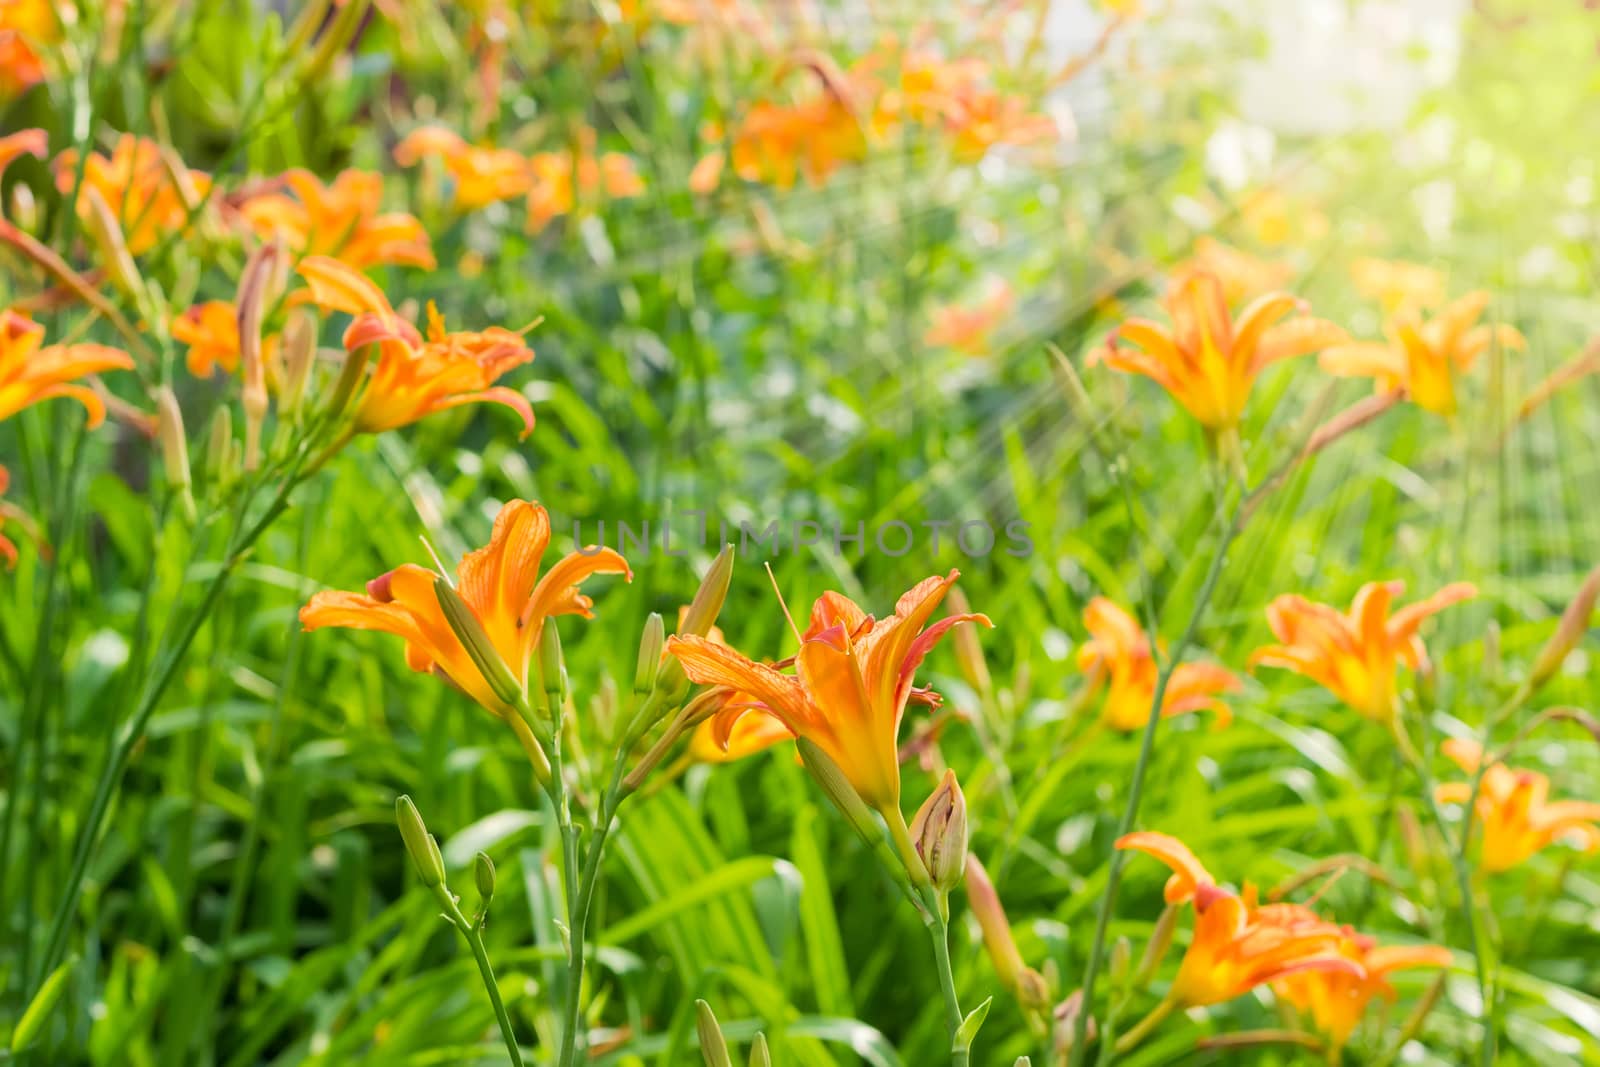 Background of the flowerbed with orange lilies in the sun rays
